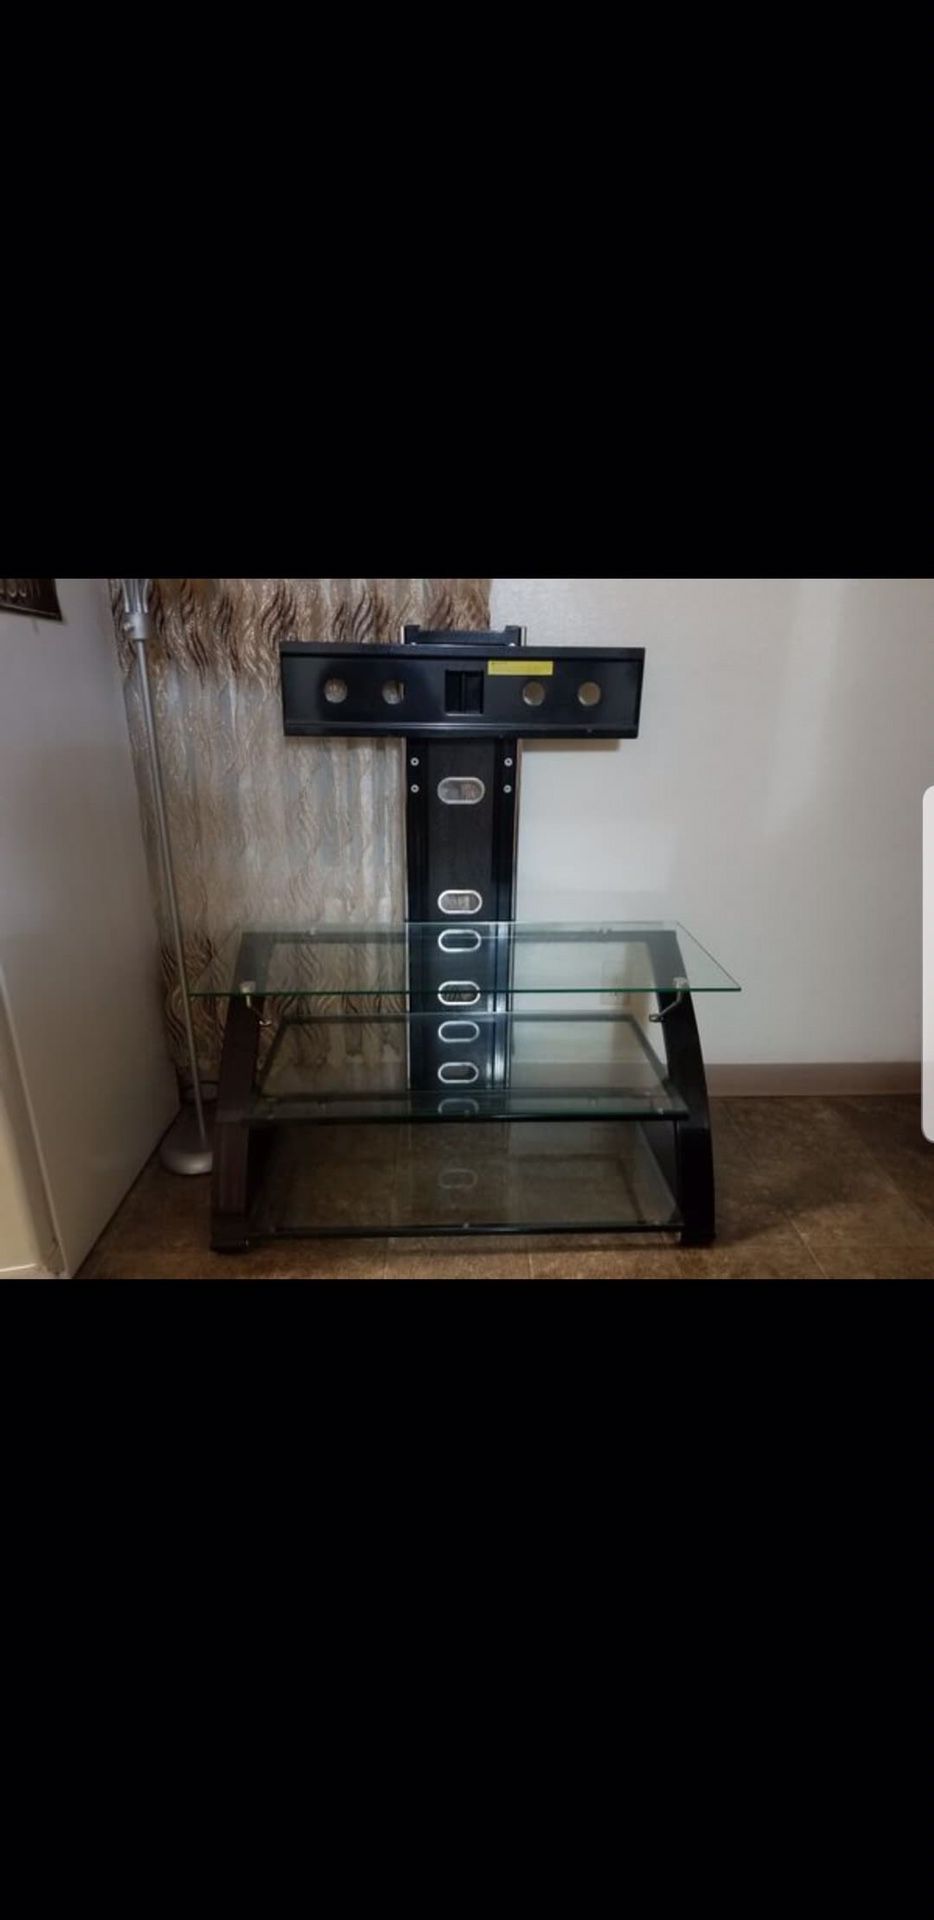 Very good condition glass length 44 inches width 19 inches stand hight 50 inches width 31 inches